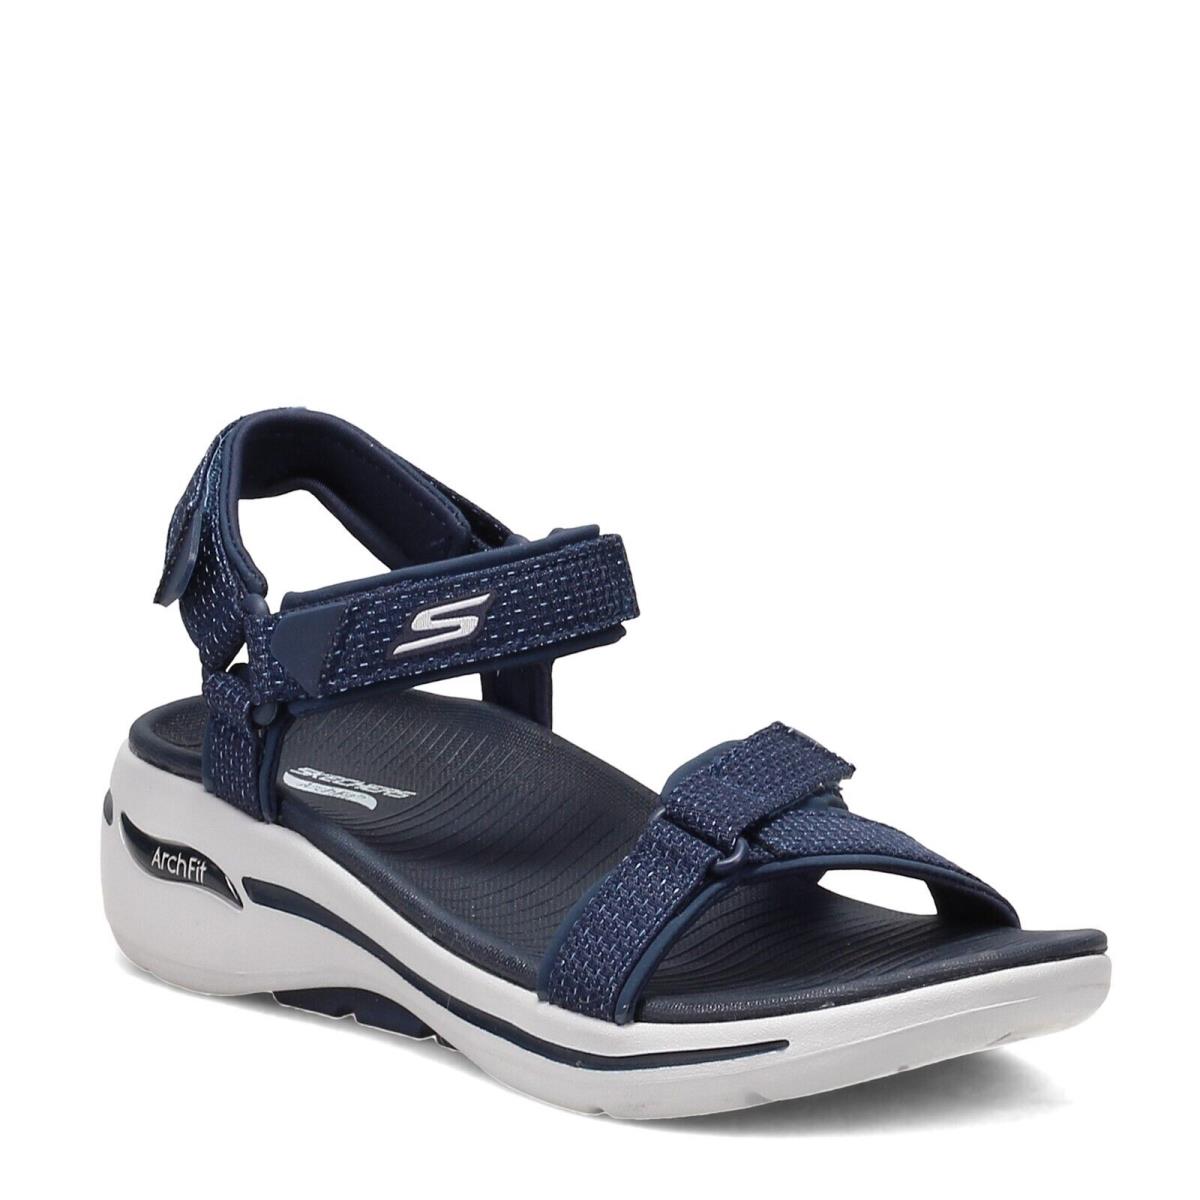 Women`s Skechers Gowalk Arch Fit - Cruise Around Sandal 140251-NVY Navy Fabric